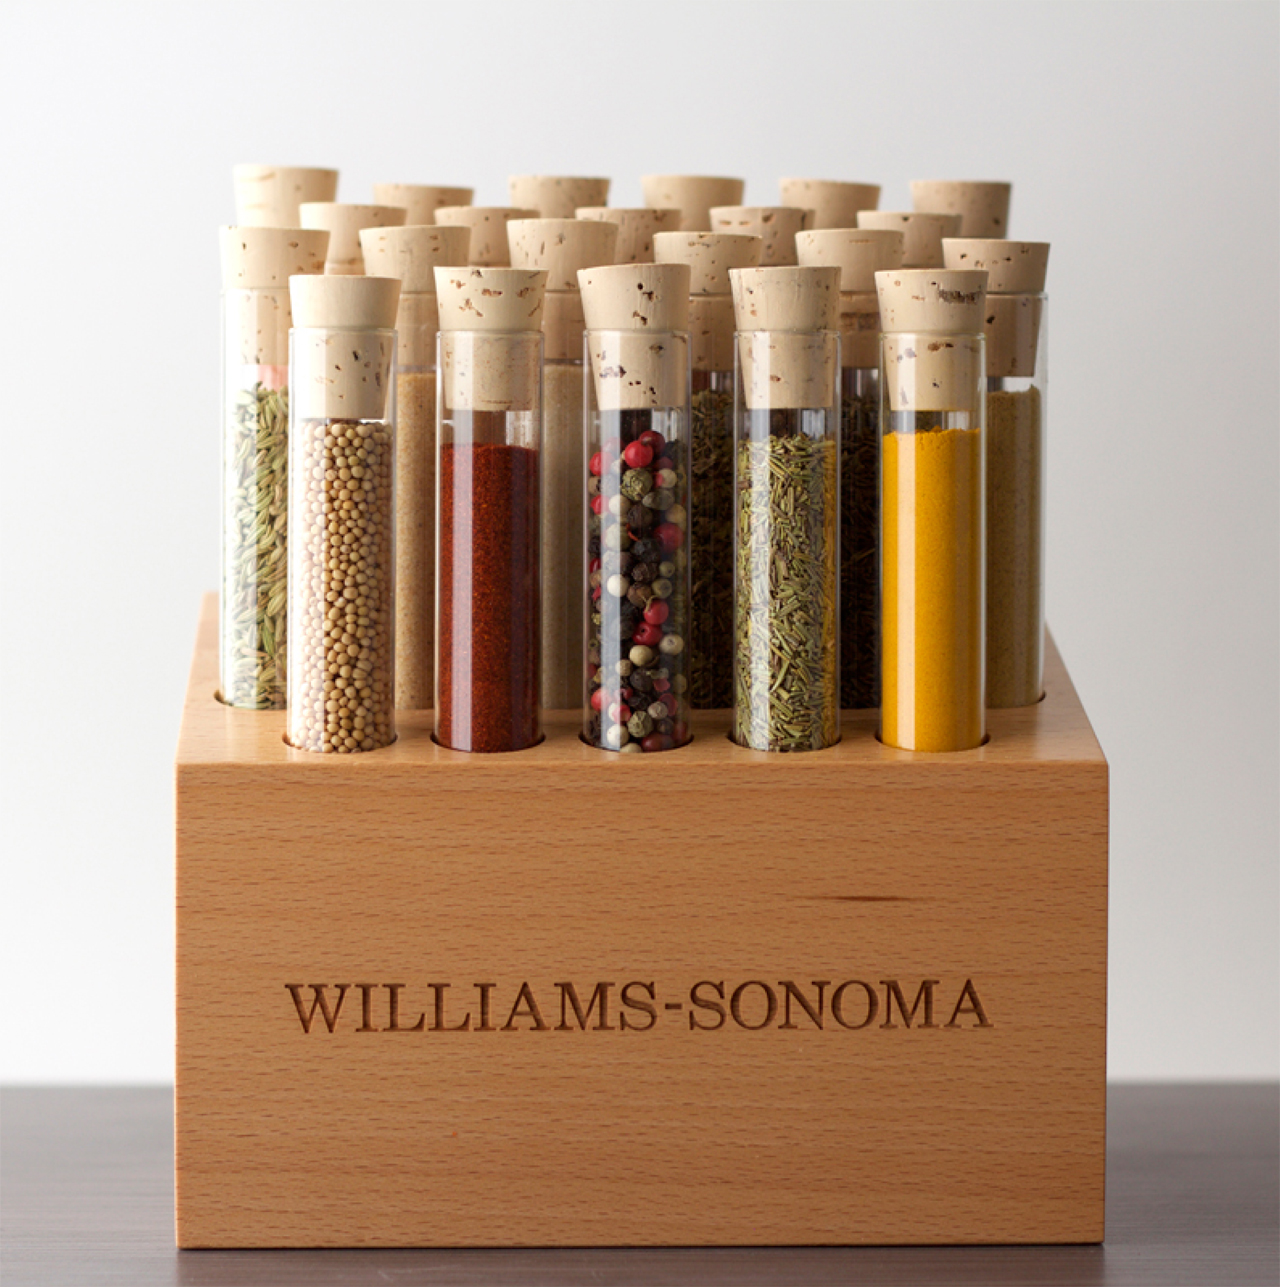 Williams-Sonoma Spice Holder - Moslow Wood Products (Virginia)